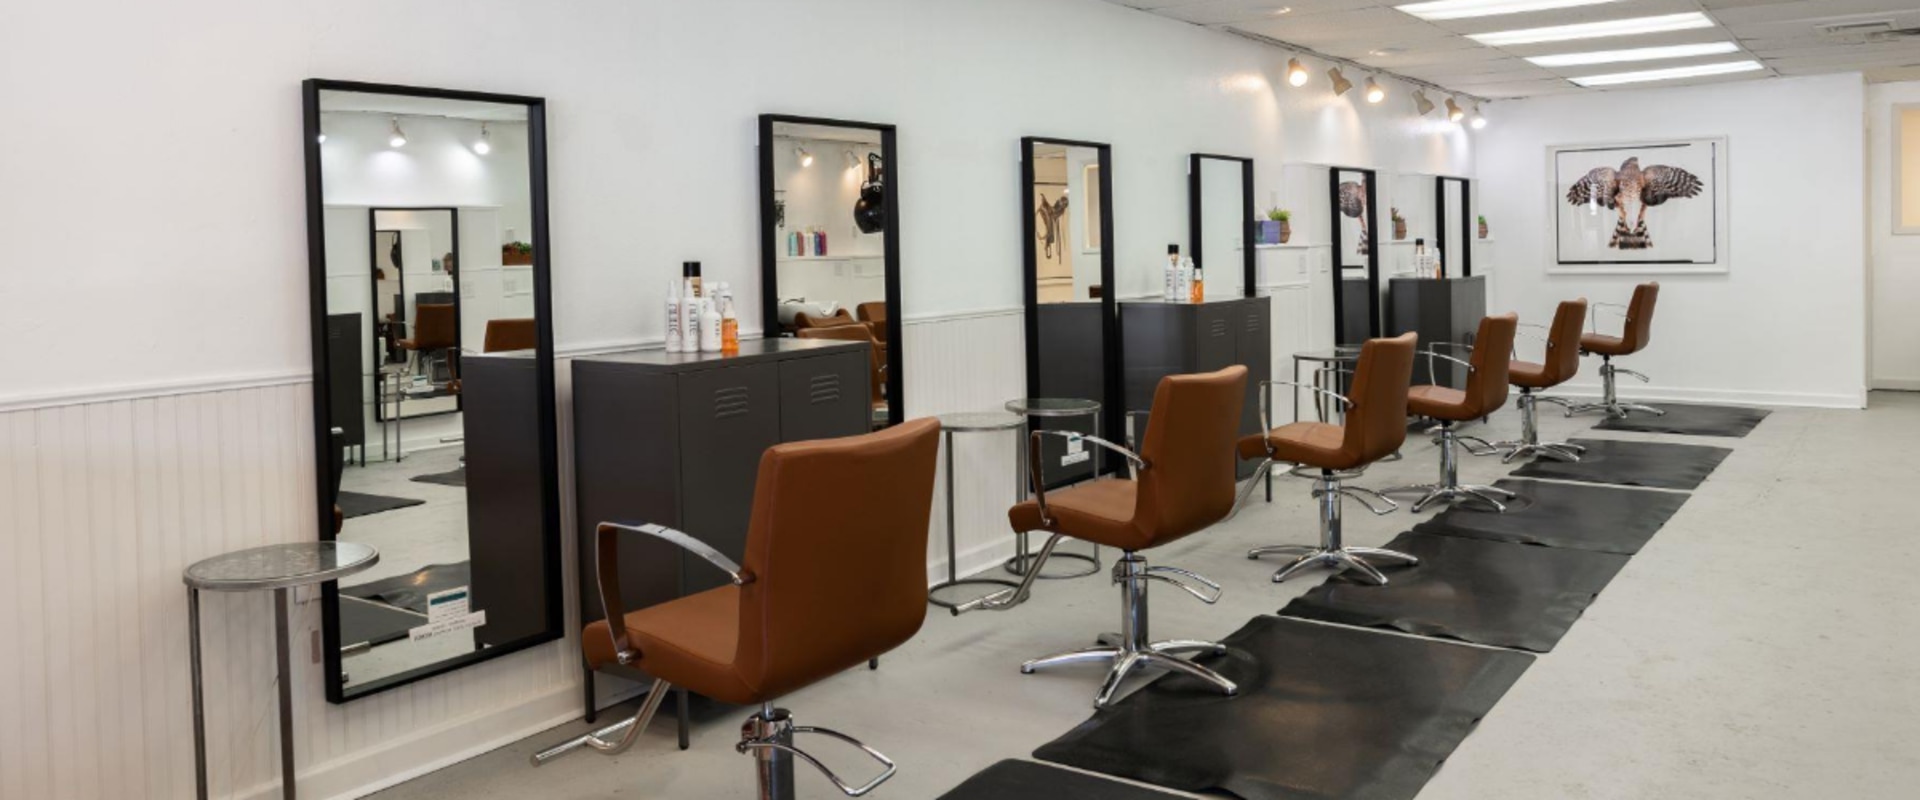 The Benefits of Being a Loyal Customer at Boutique Salons in Denver, CO